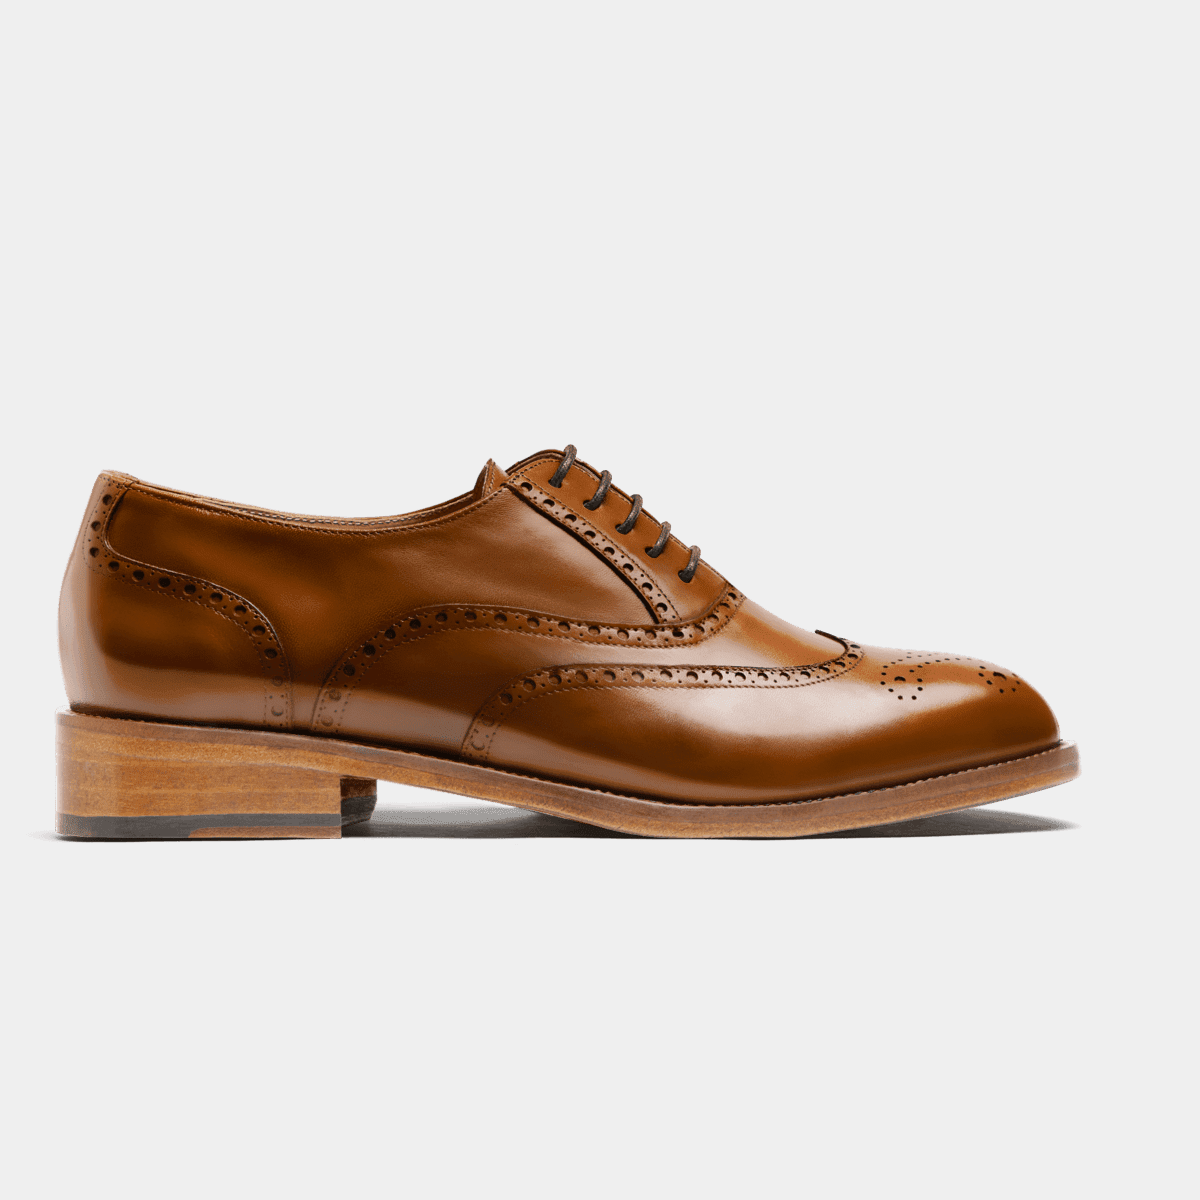 Full Brogue shoes - brown flora leather | Sumissura